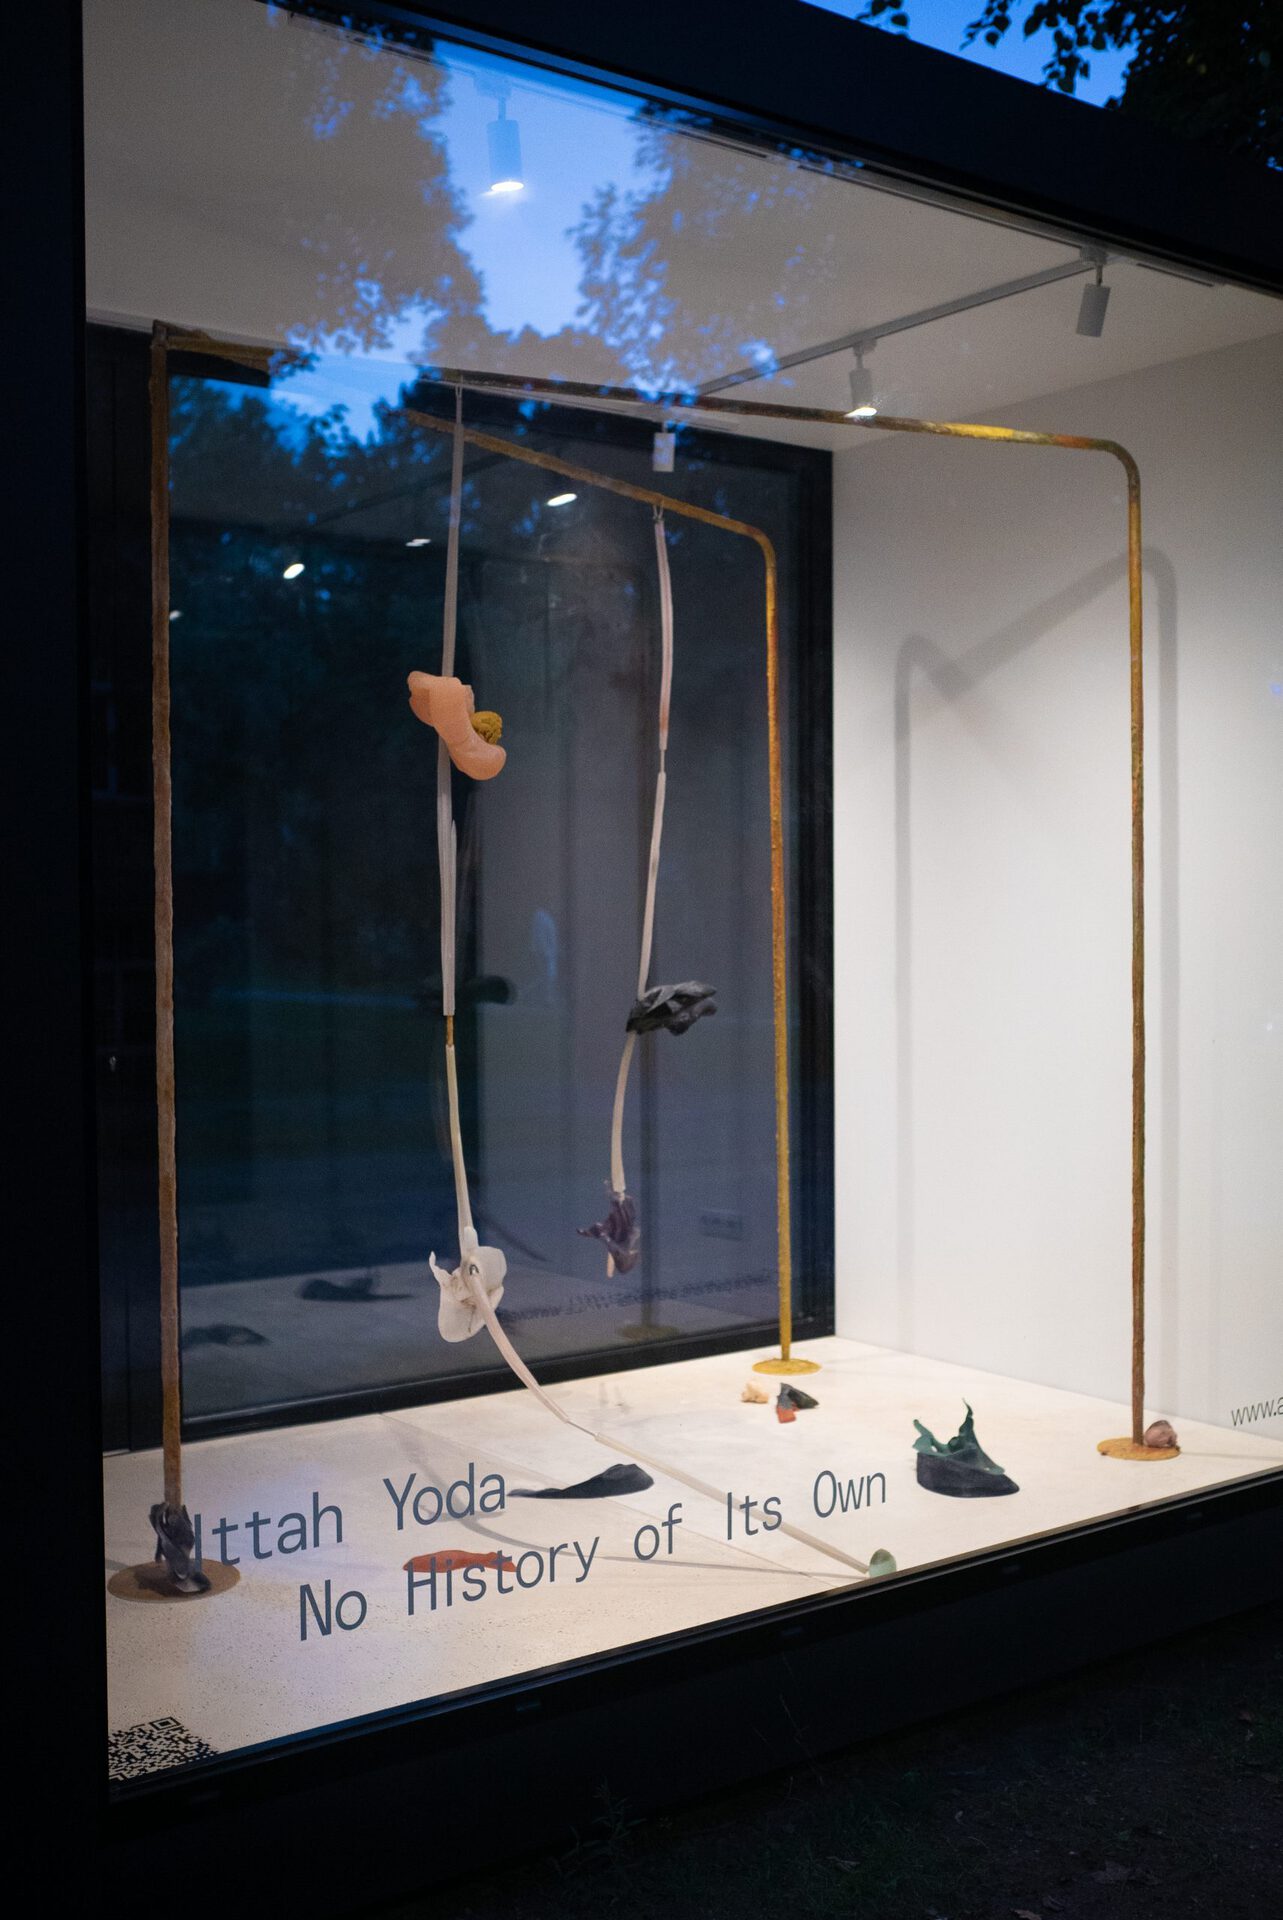 Ittah Yoda, No History of Its Own, 2021,  installation view, Rupert at apiece, Vilnius.  Photo by Laurynas Skeisgiela. Courtesy of the artist.